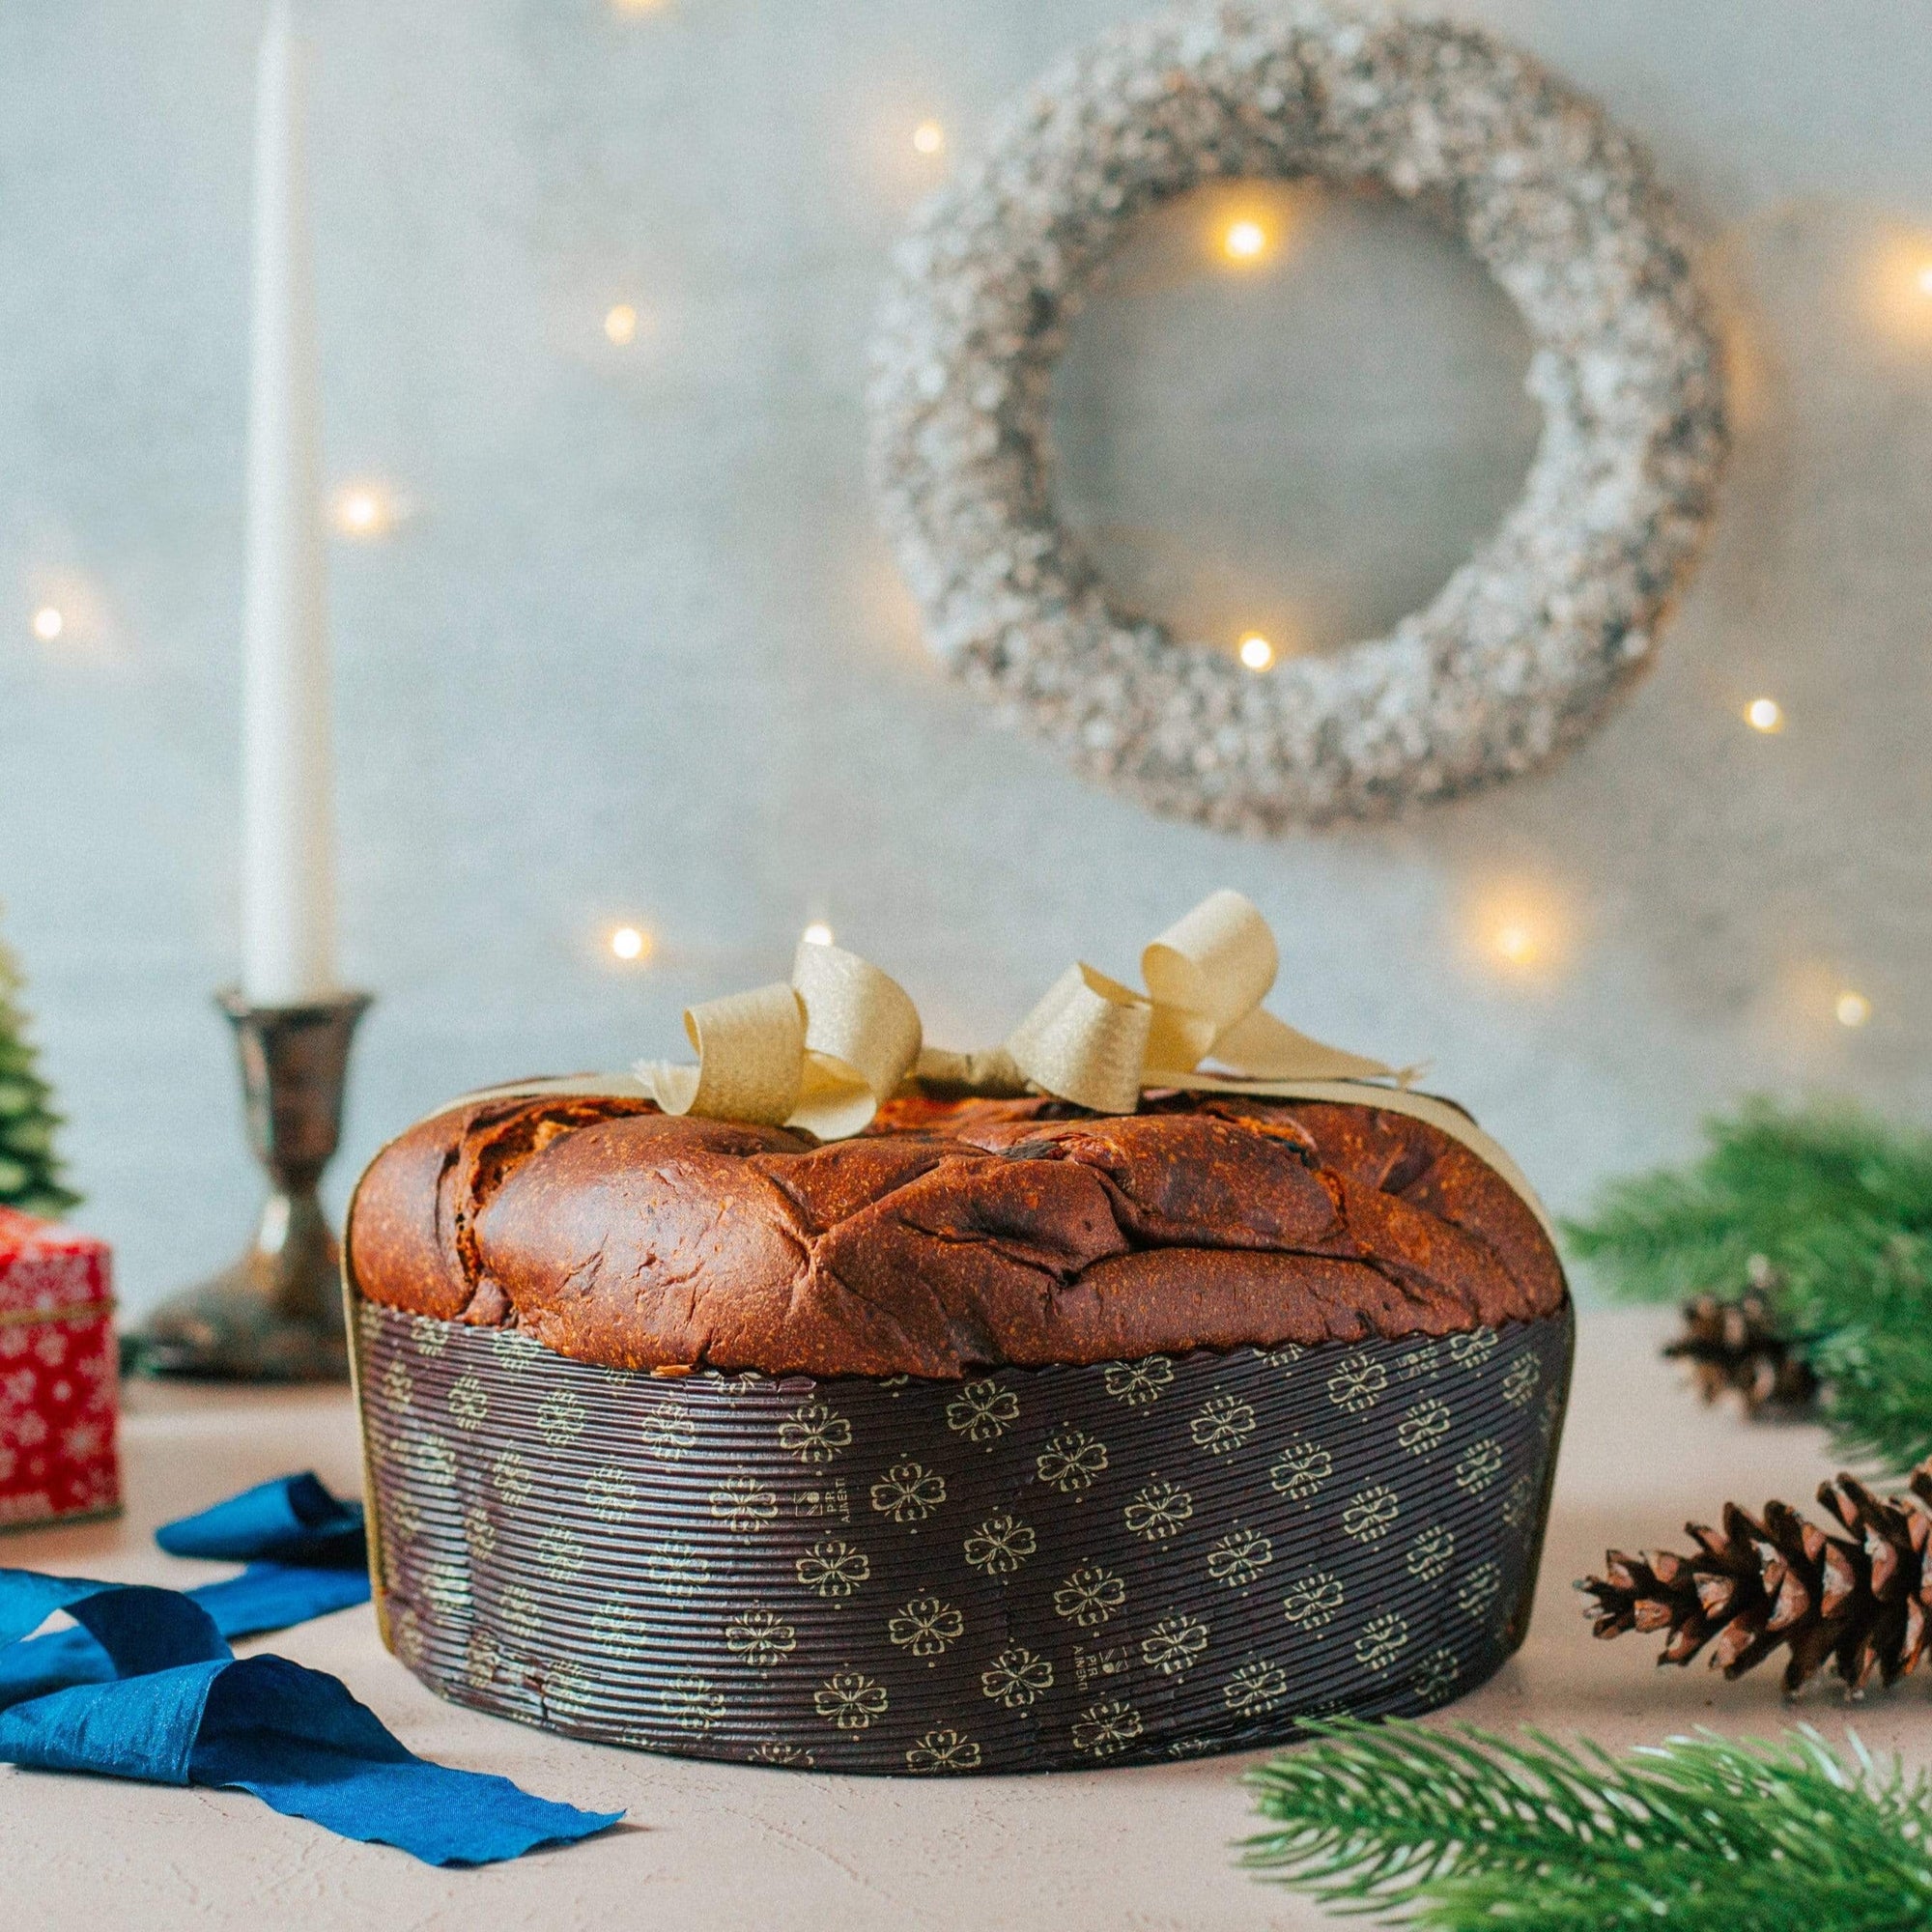 Tasty Ribbon Panettone in a Box